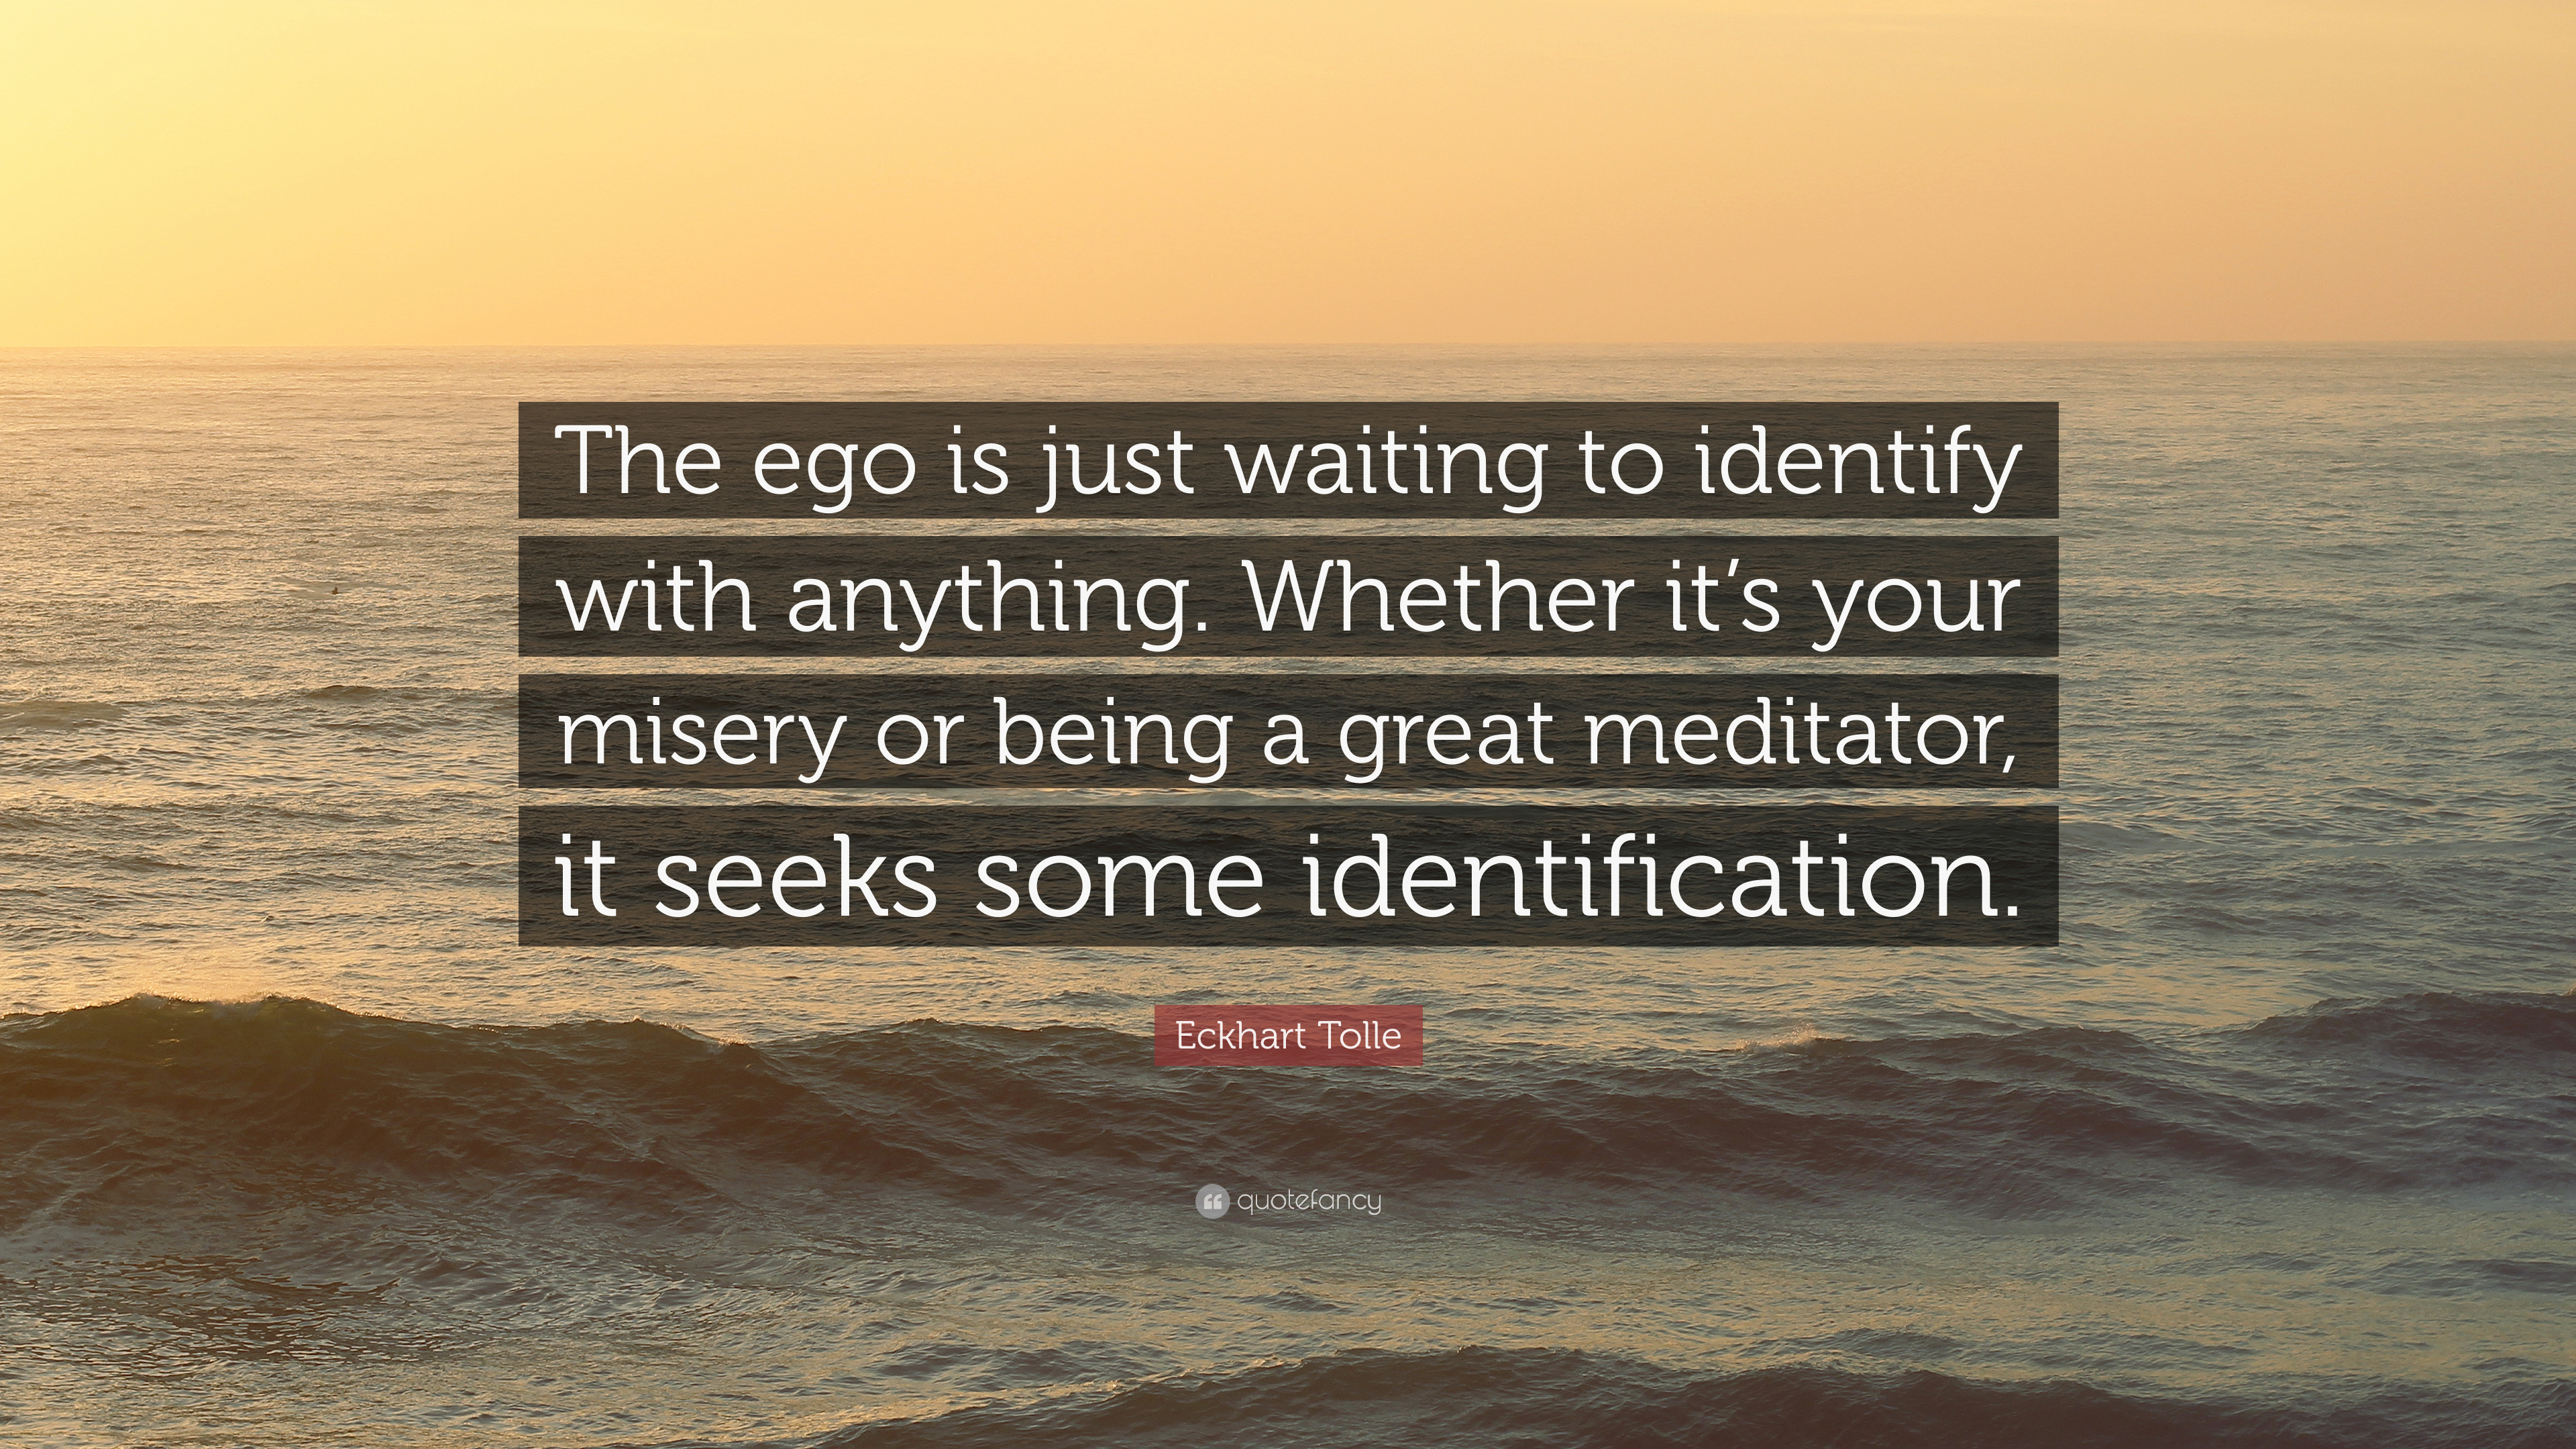 Eckhart Tolle Quote: “The ego is just waiting to identify with ...